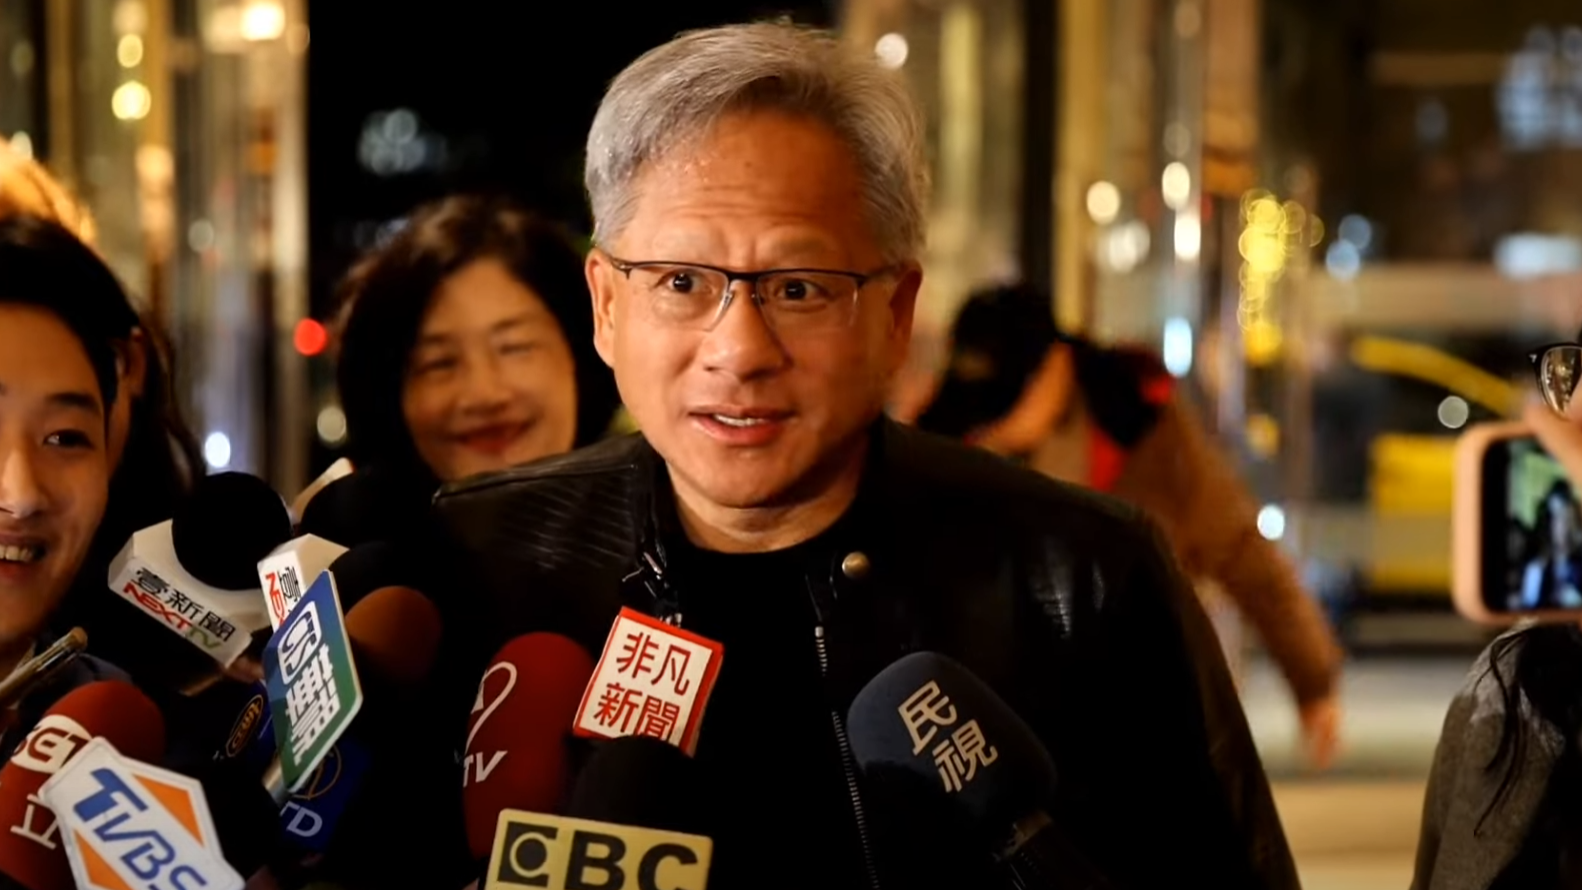 Nvidia CEO Jensen Huang meets with TSMC in Taiwan, discusses AI chip shortage concerns over dinner